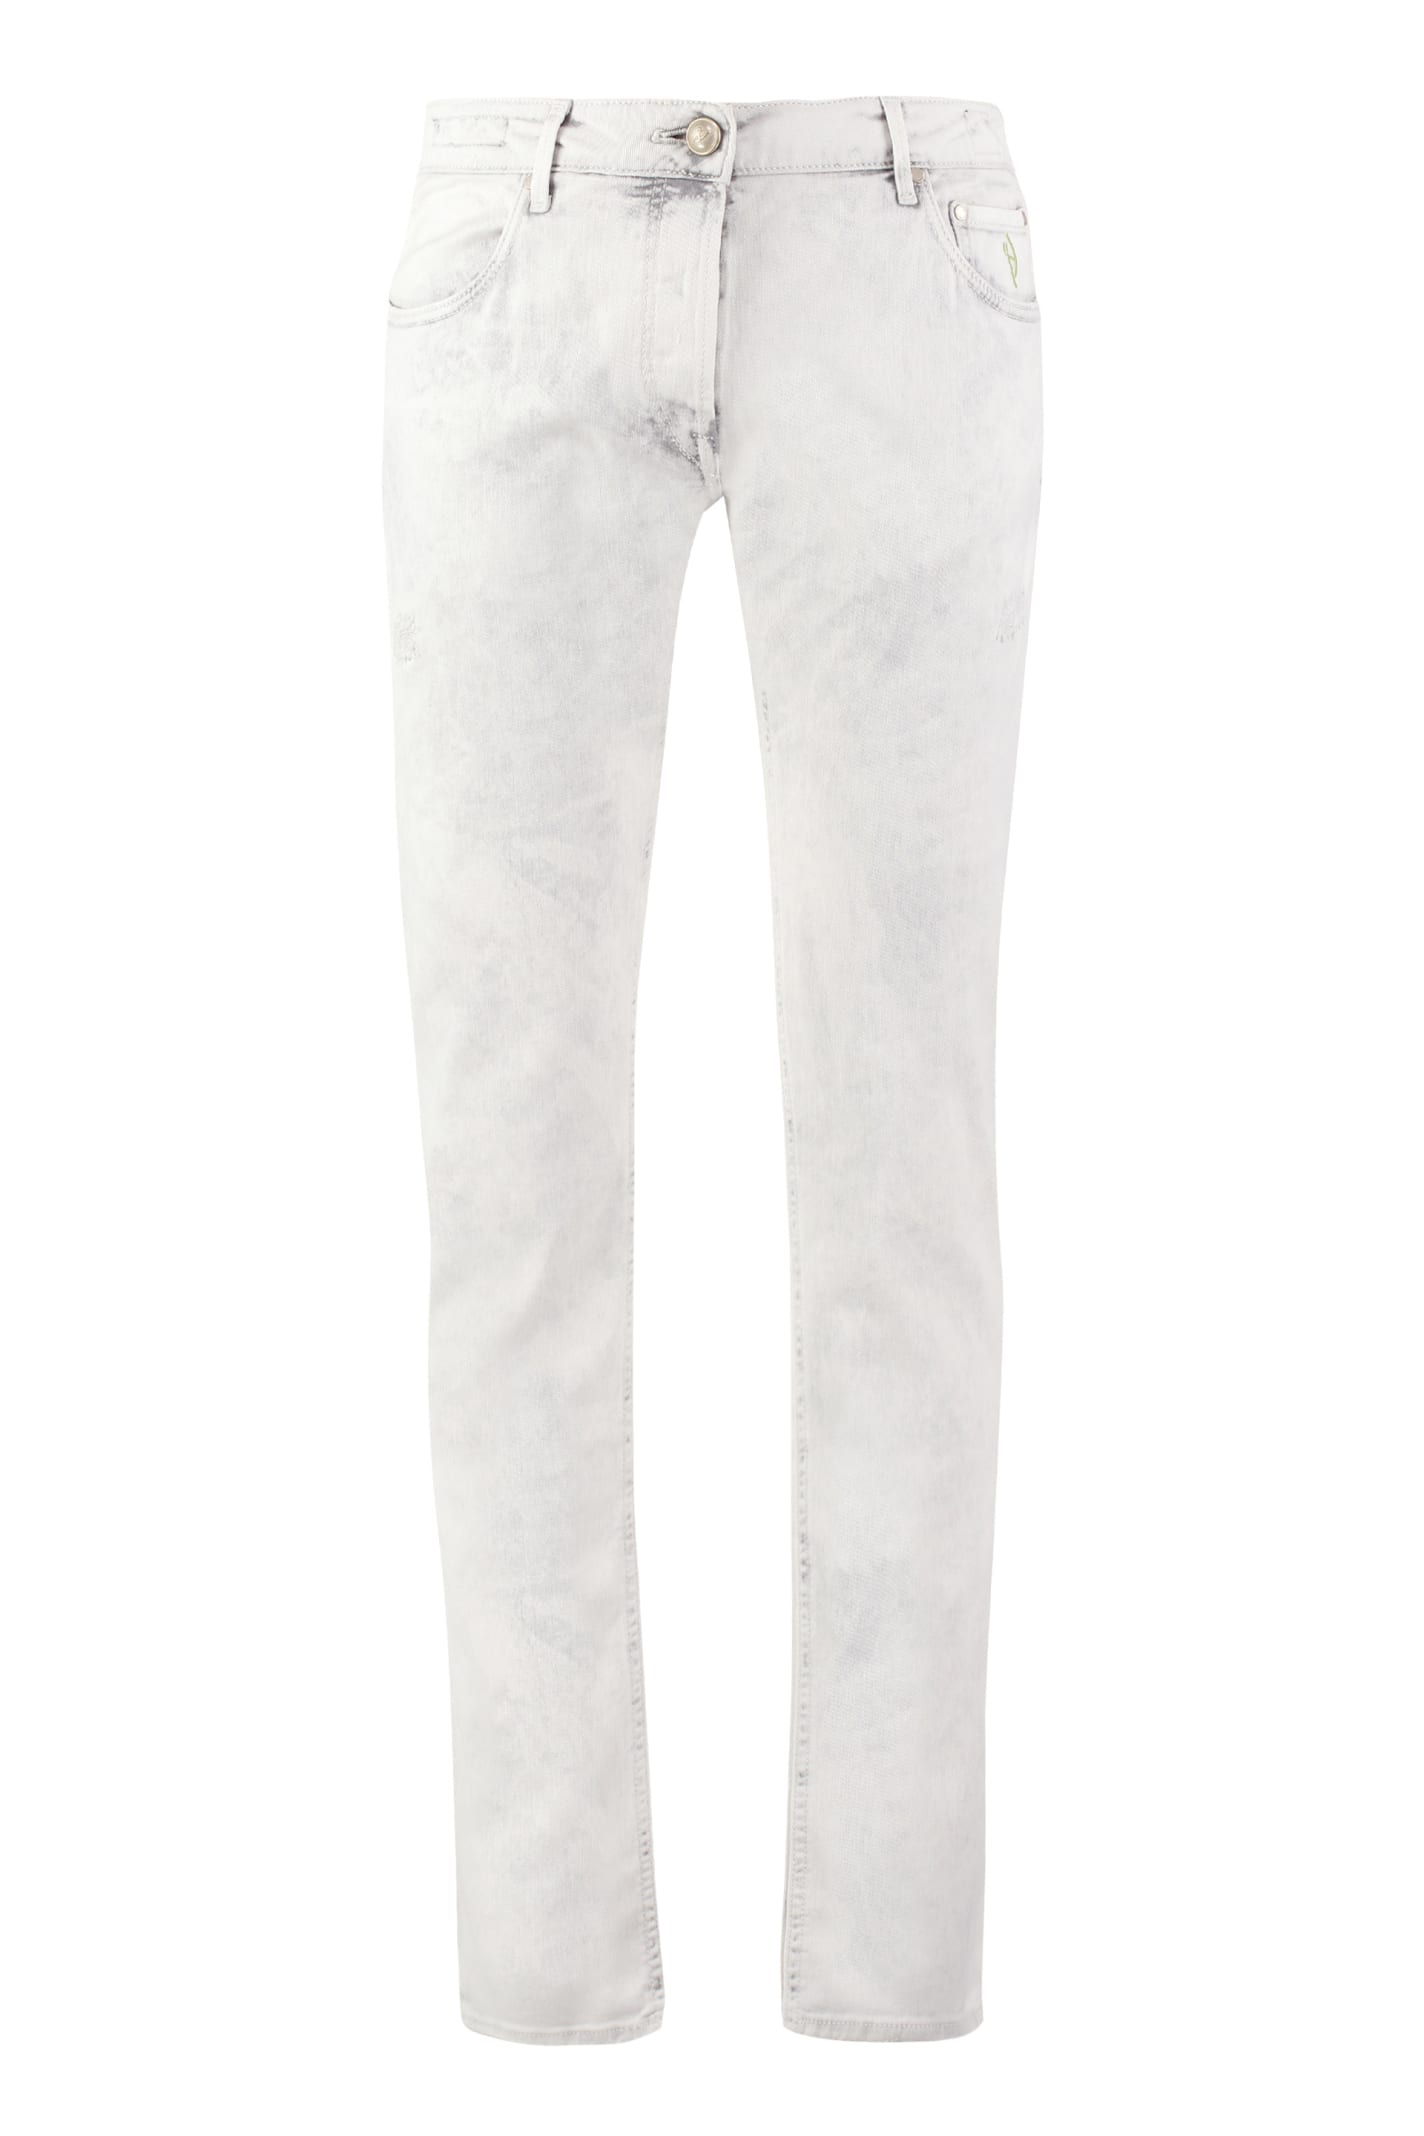 Shop Hand Picked Orvieto Slim Fit Jeans In Grey